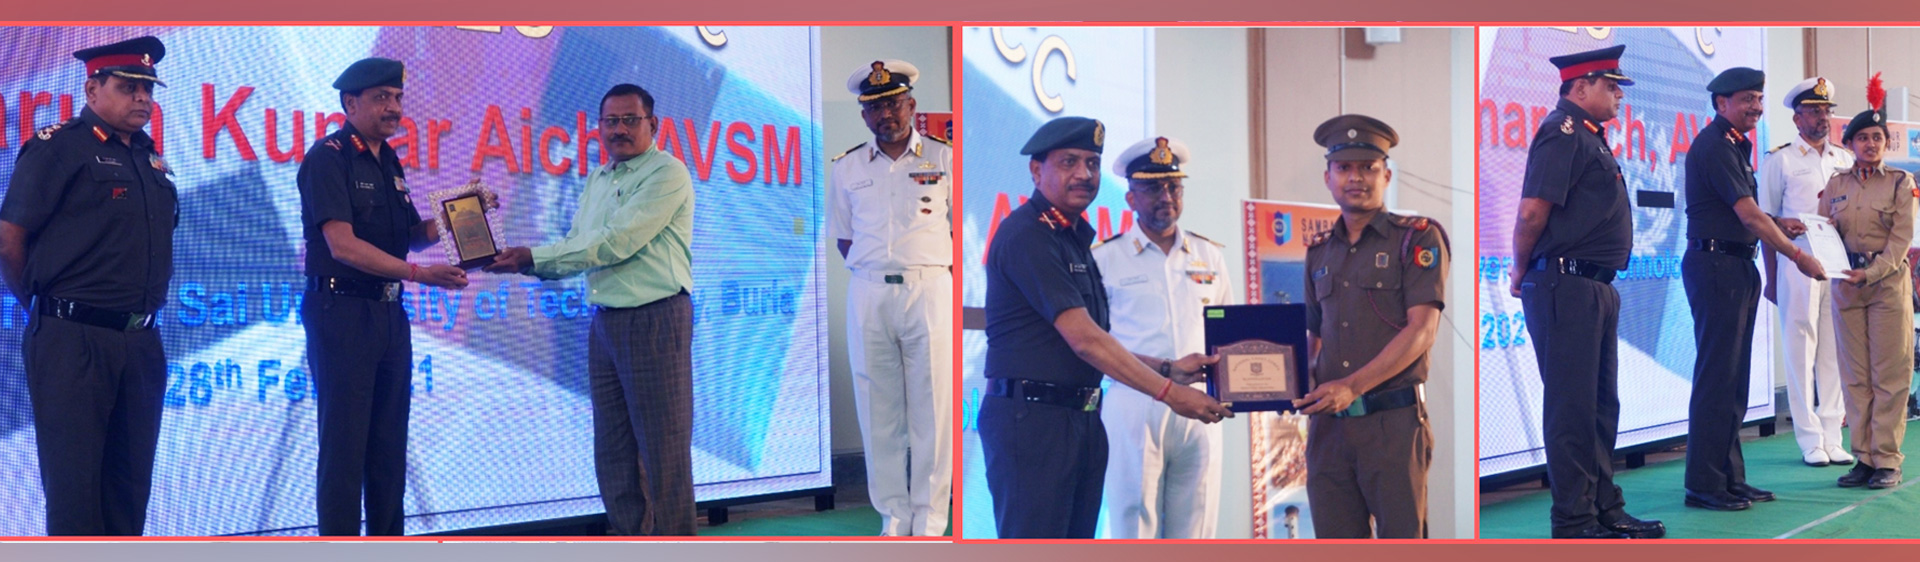 Cdt Payal Sahu and Lt. Birendra Kumar Barik has been awarded DG Commendation Card & DG Plaque respectively by the Director General of NCC Lt. General Tarun Kumar Aich, AVSM for the most sincere, dedicated and exemplary performance in NCC.